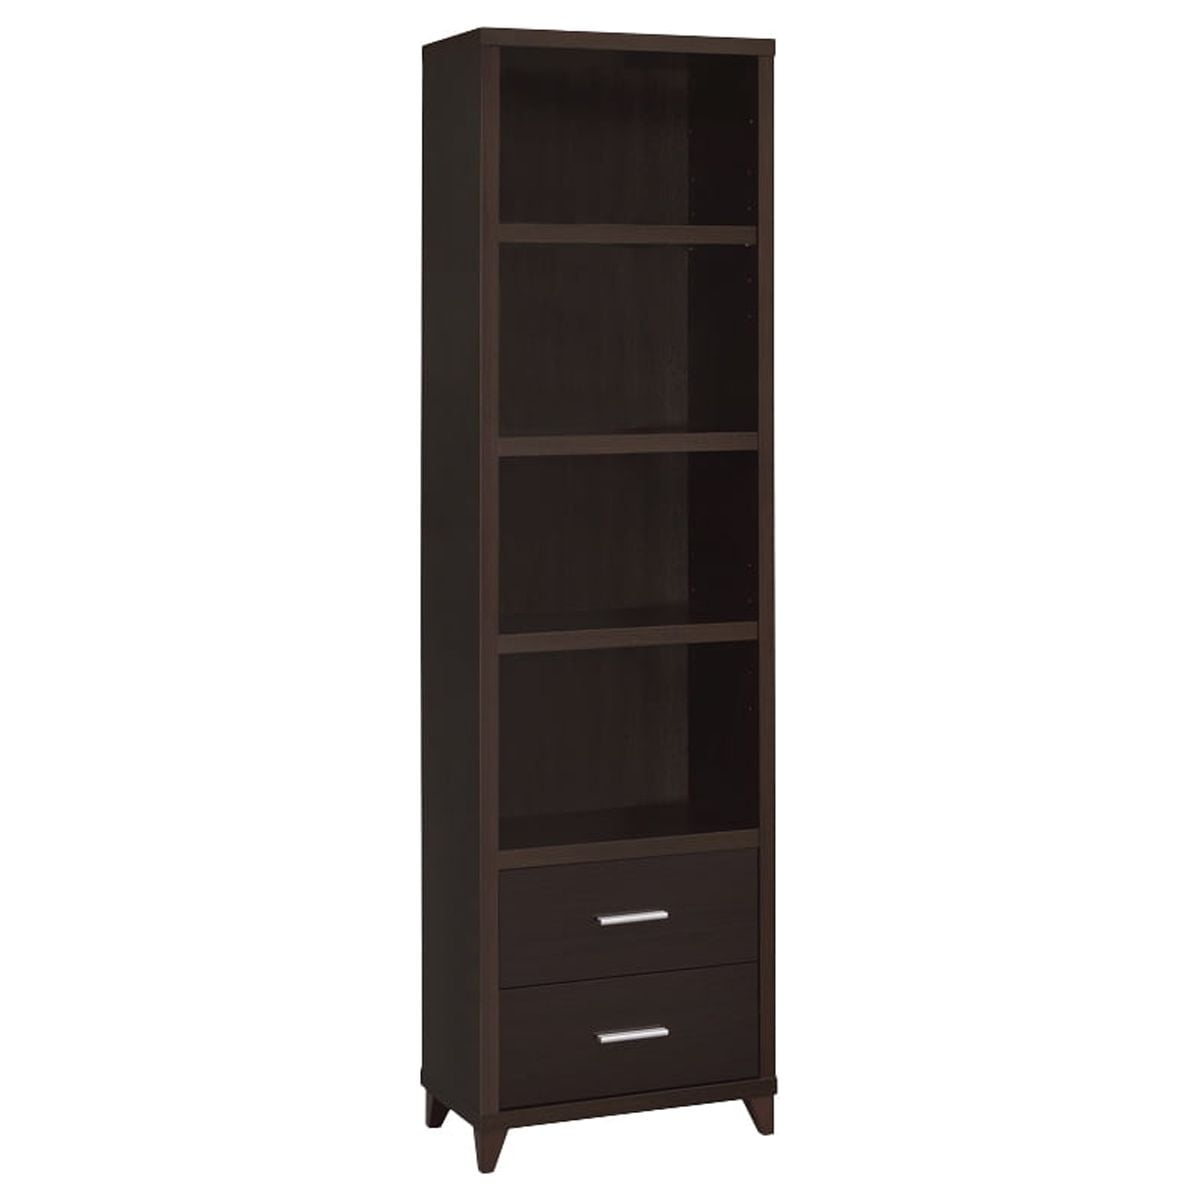 Picture of Benjara BM220300 3 Shelf Wooden Media Tower with 2 Drawers, Dark Brown - 76 x 21.25 x 11.5 in.